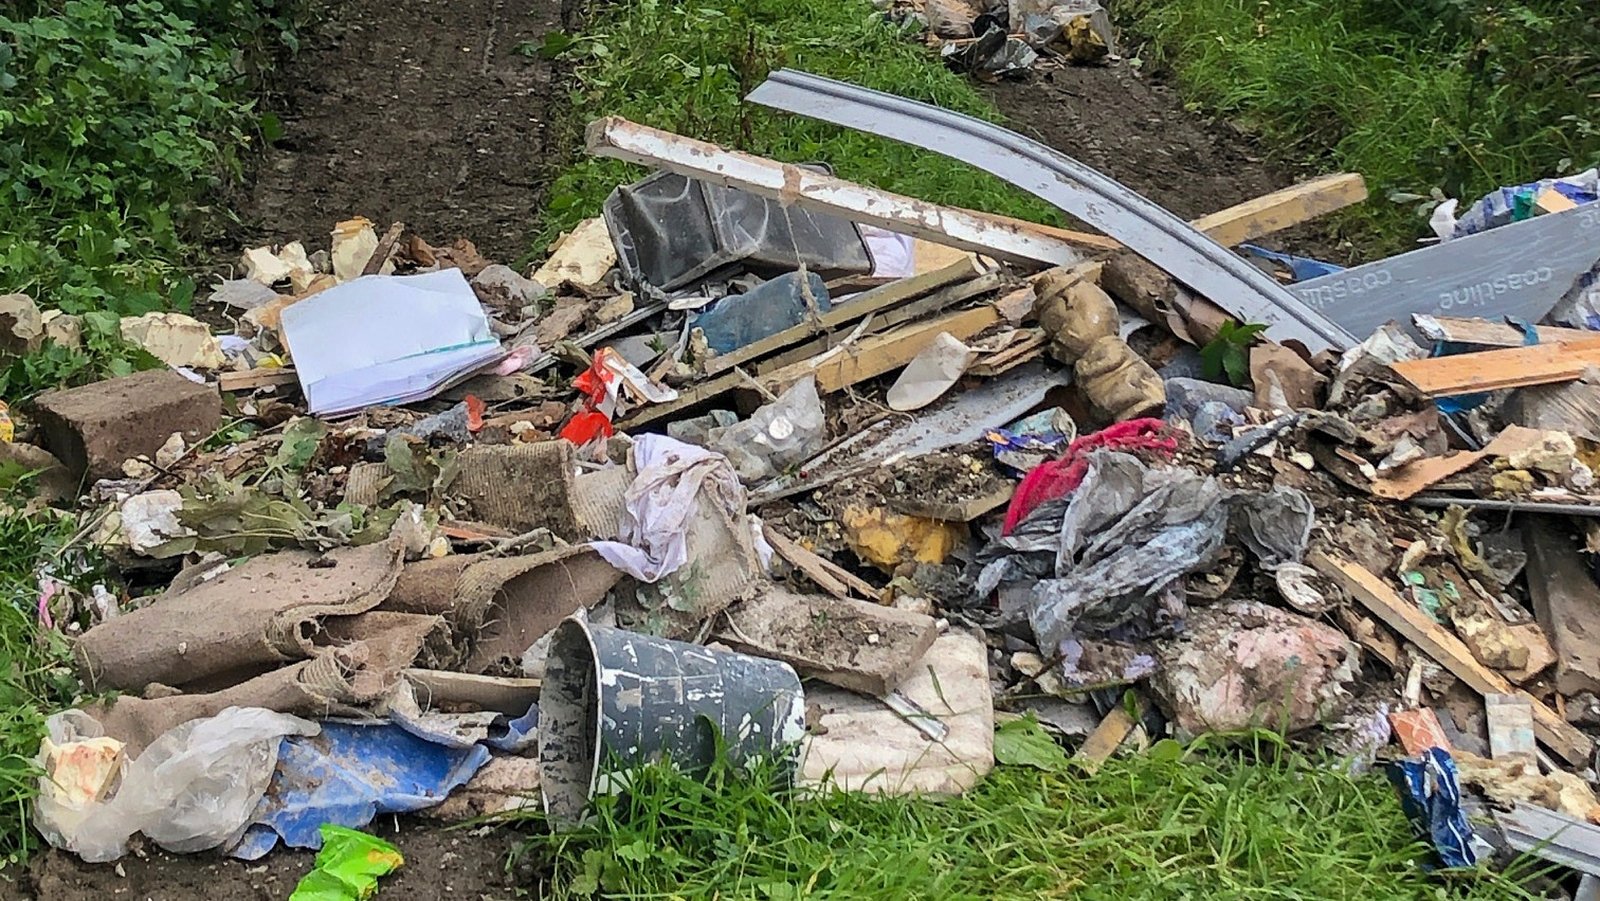 Illegal waste dumped in Co Louth laneway